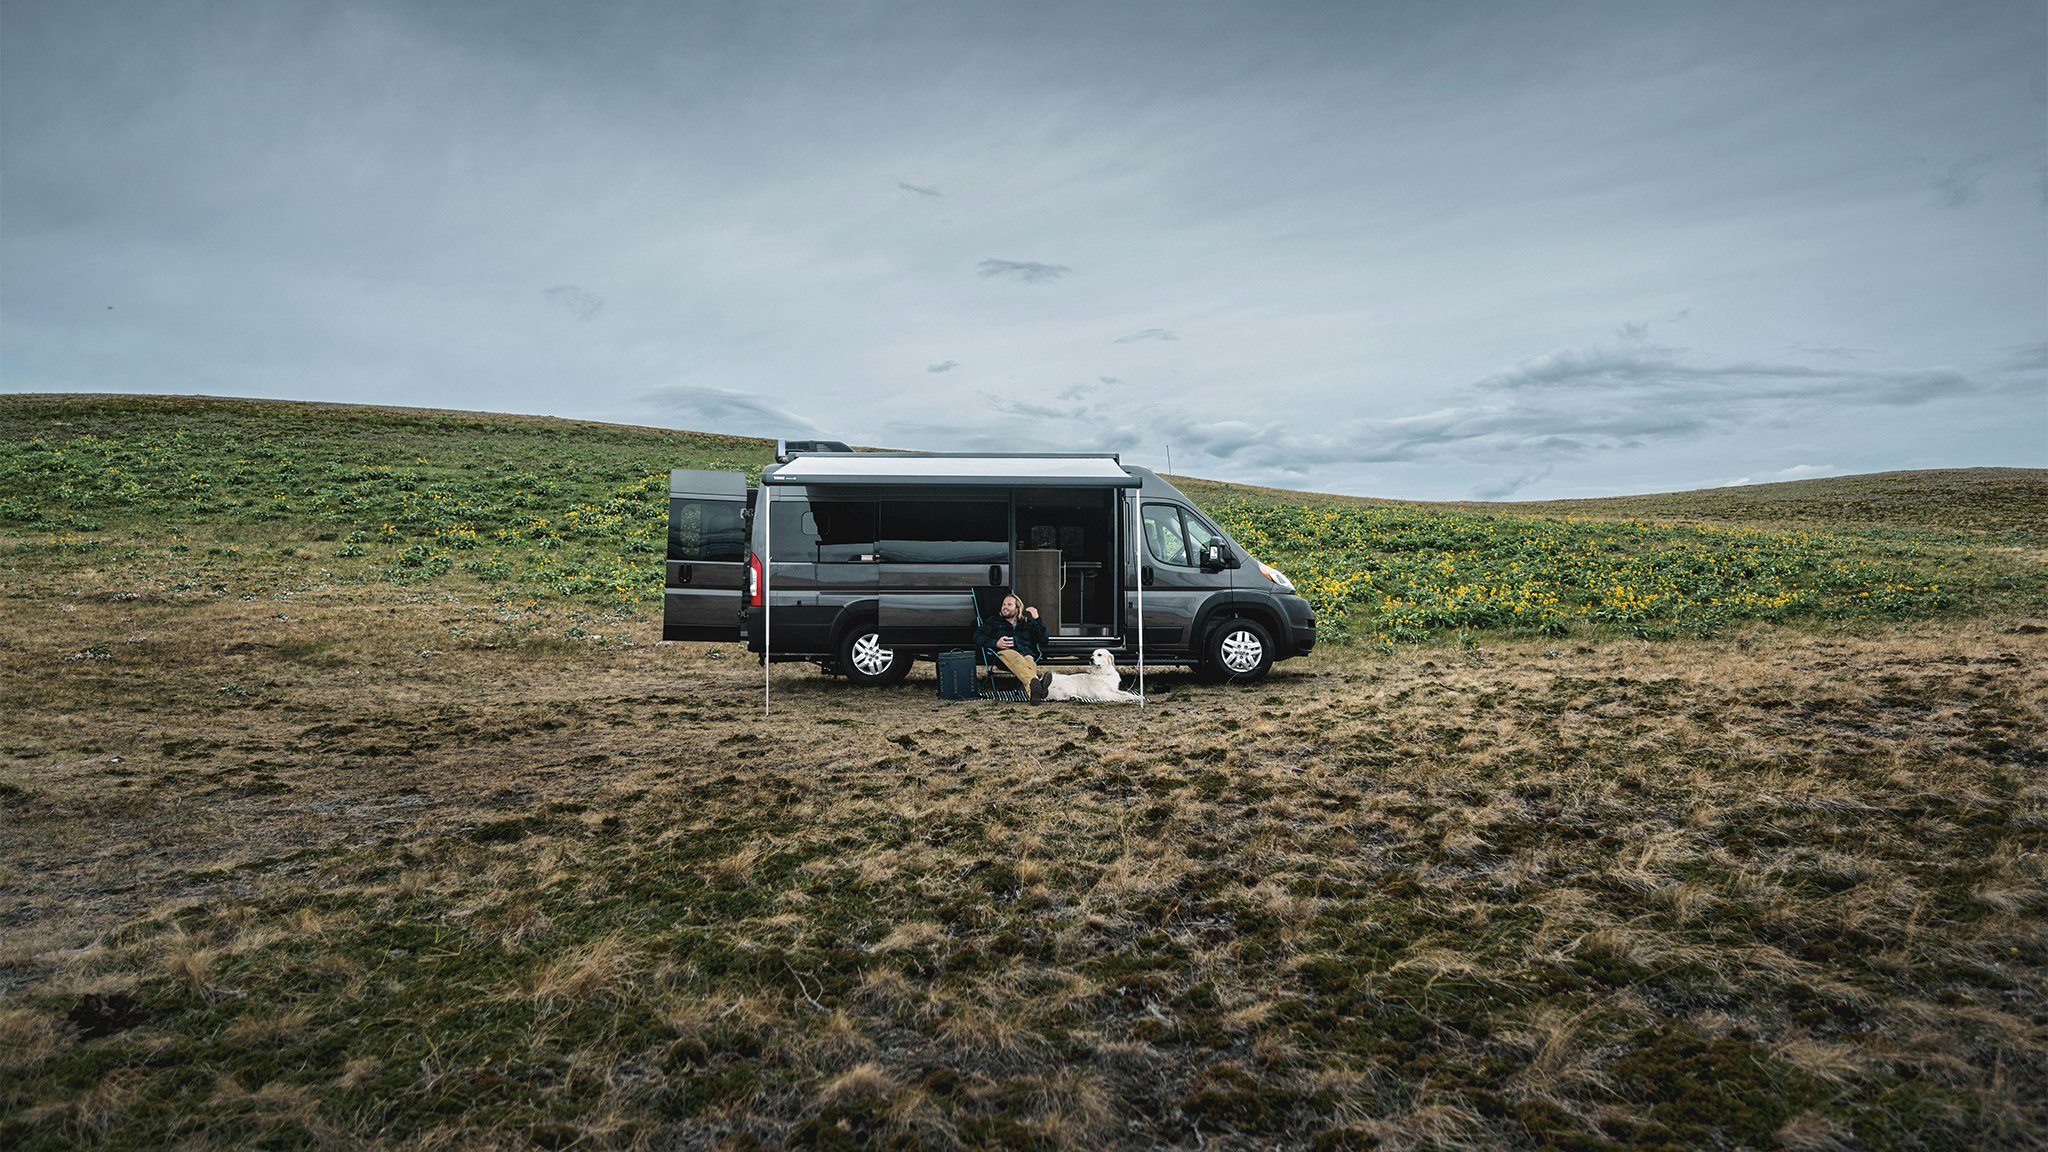 7 Game-Changing Features of the Airstream Rangeline Touring Coach -  Airstream